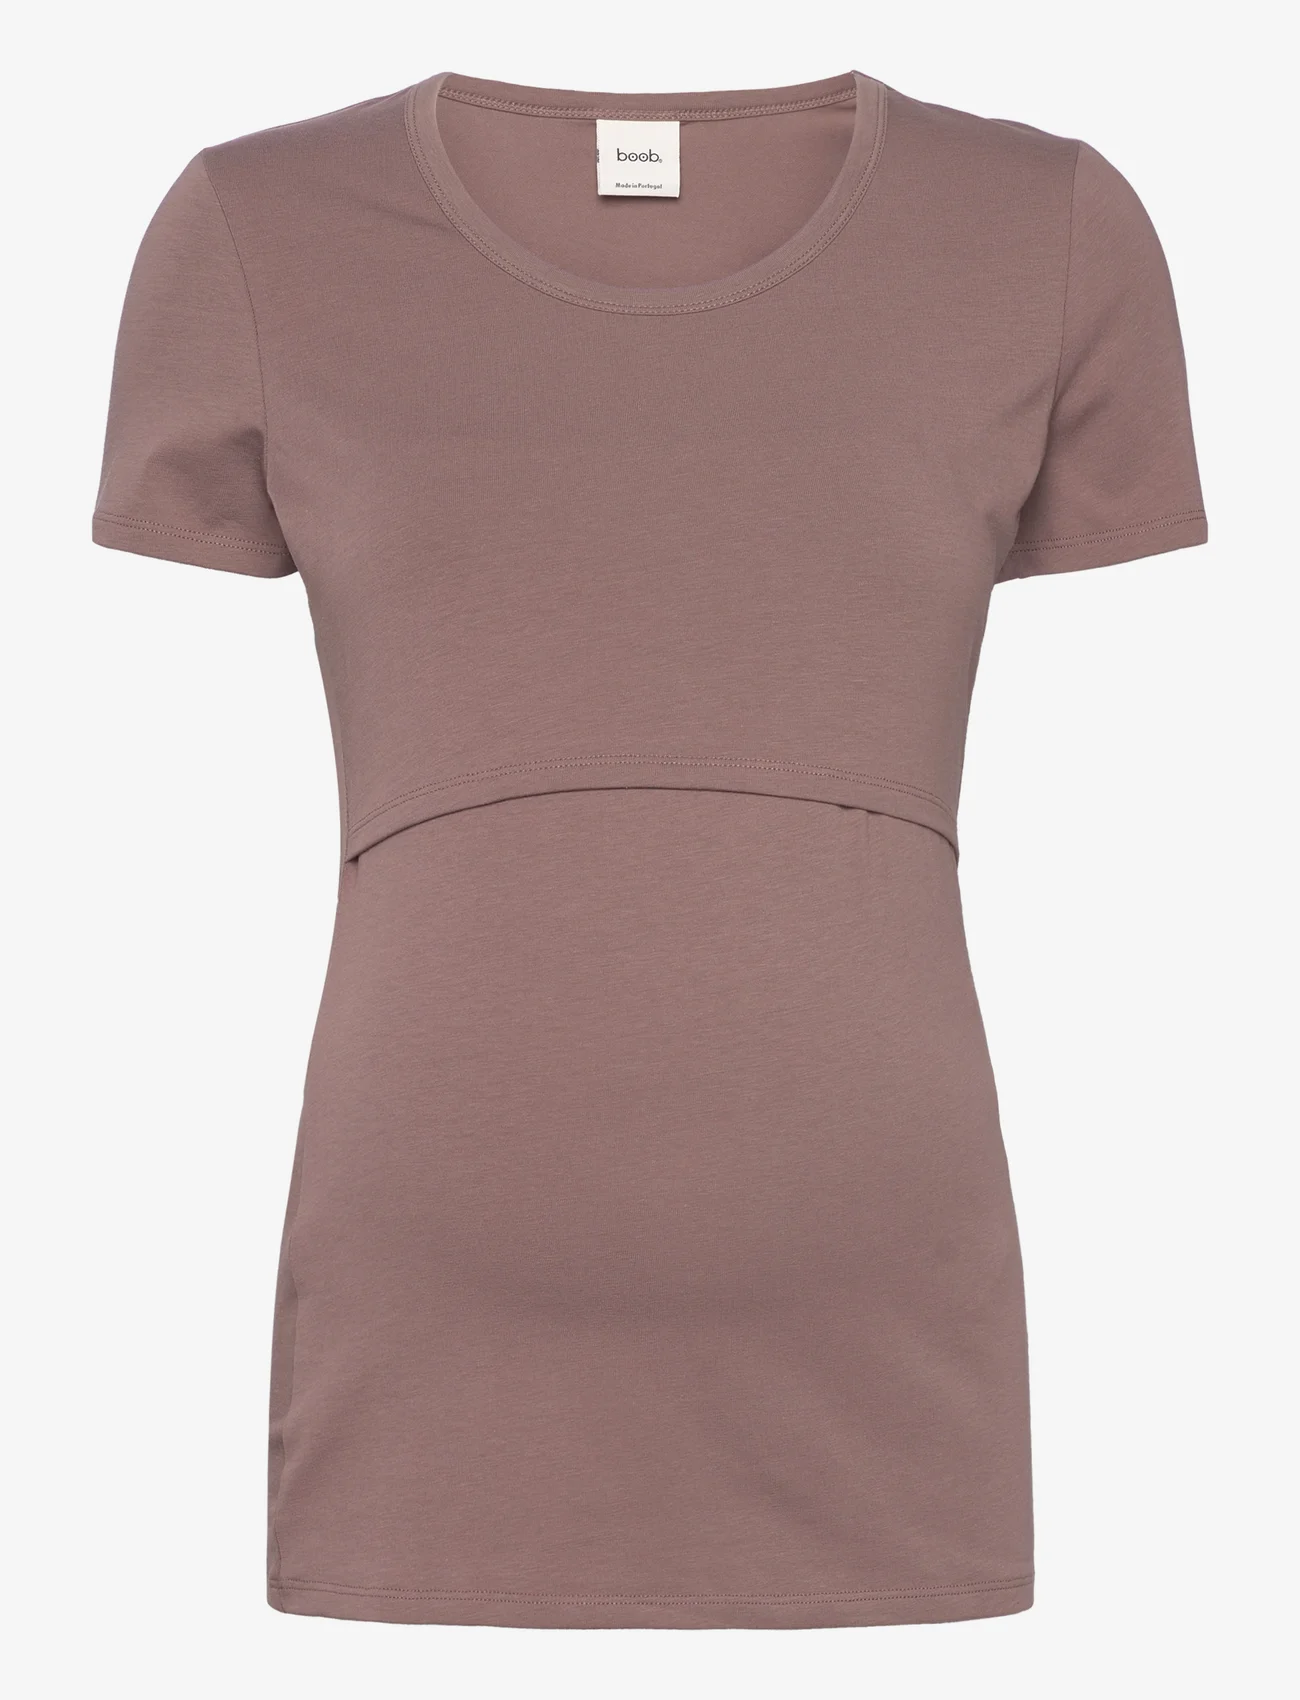 Boob - Classic s/s top - t-shirts & tops - dark taupe - 0